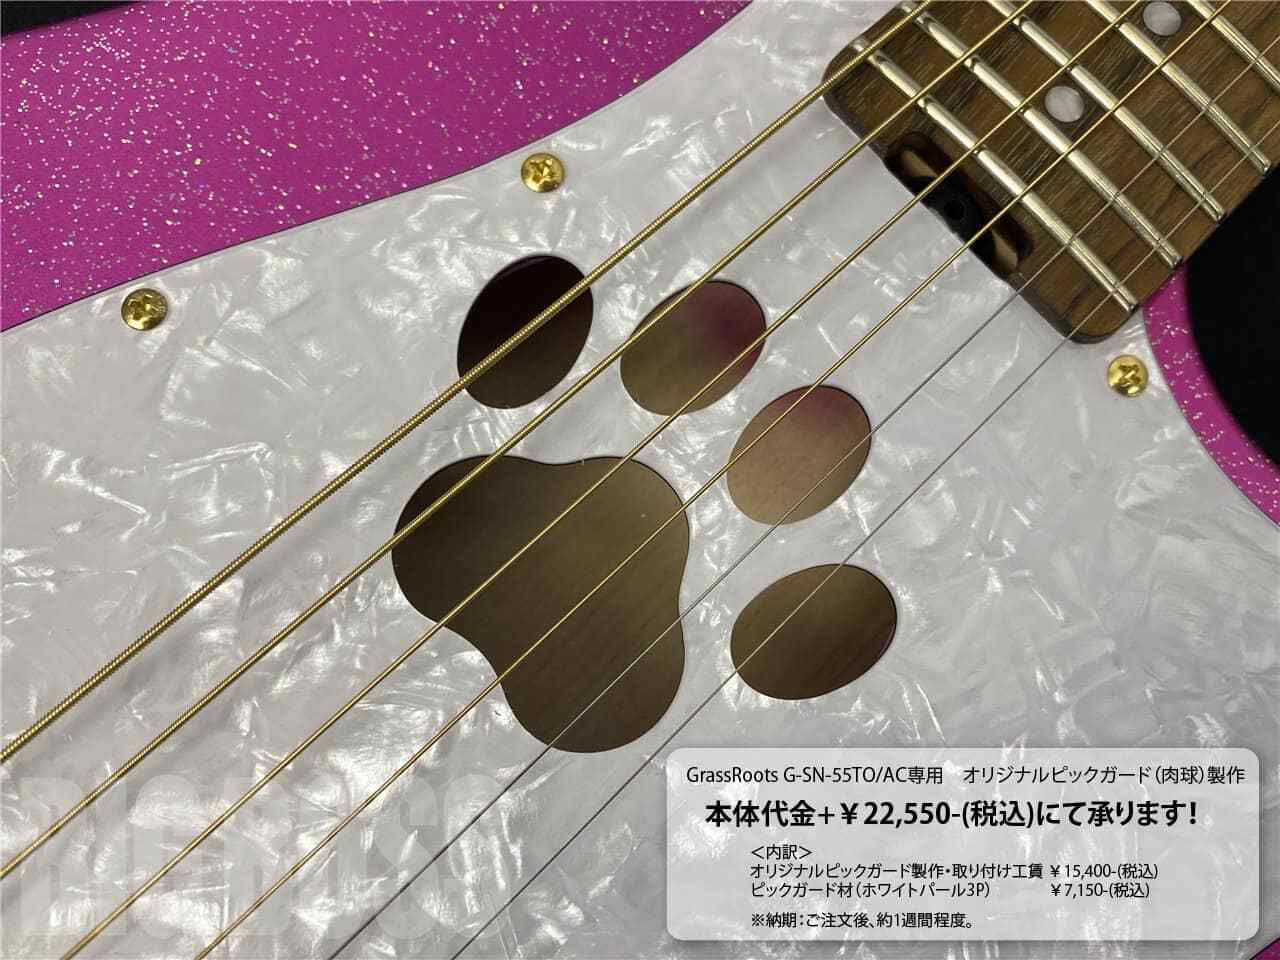 GrassRoots G-SN-55TO AC Produced by Takayoshi Ohmura エレクトリックアコースティックギタ